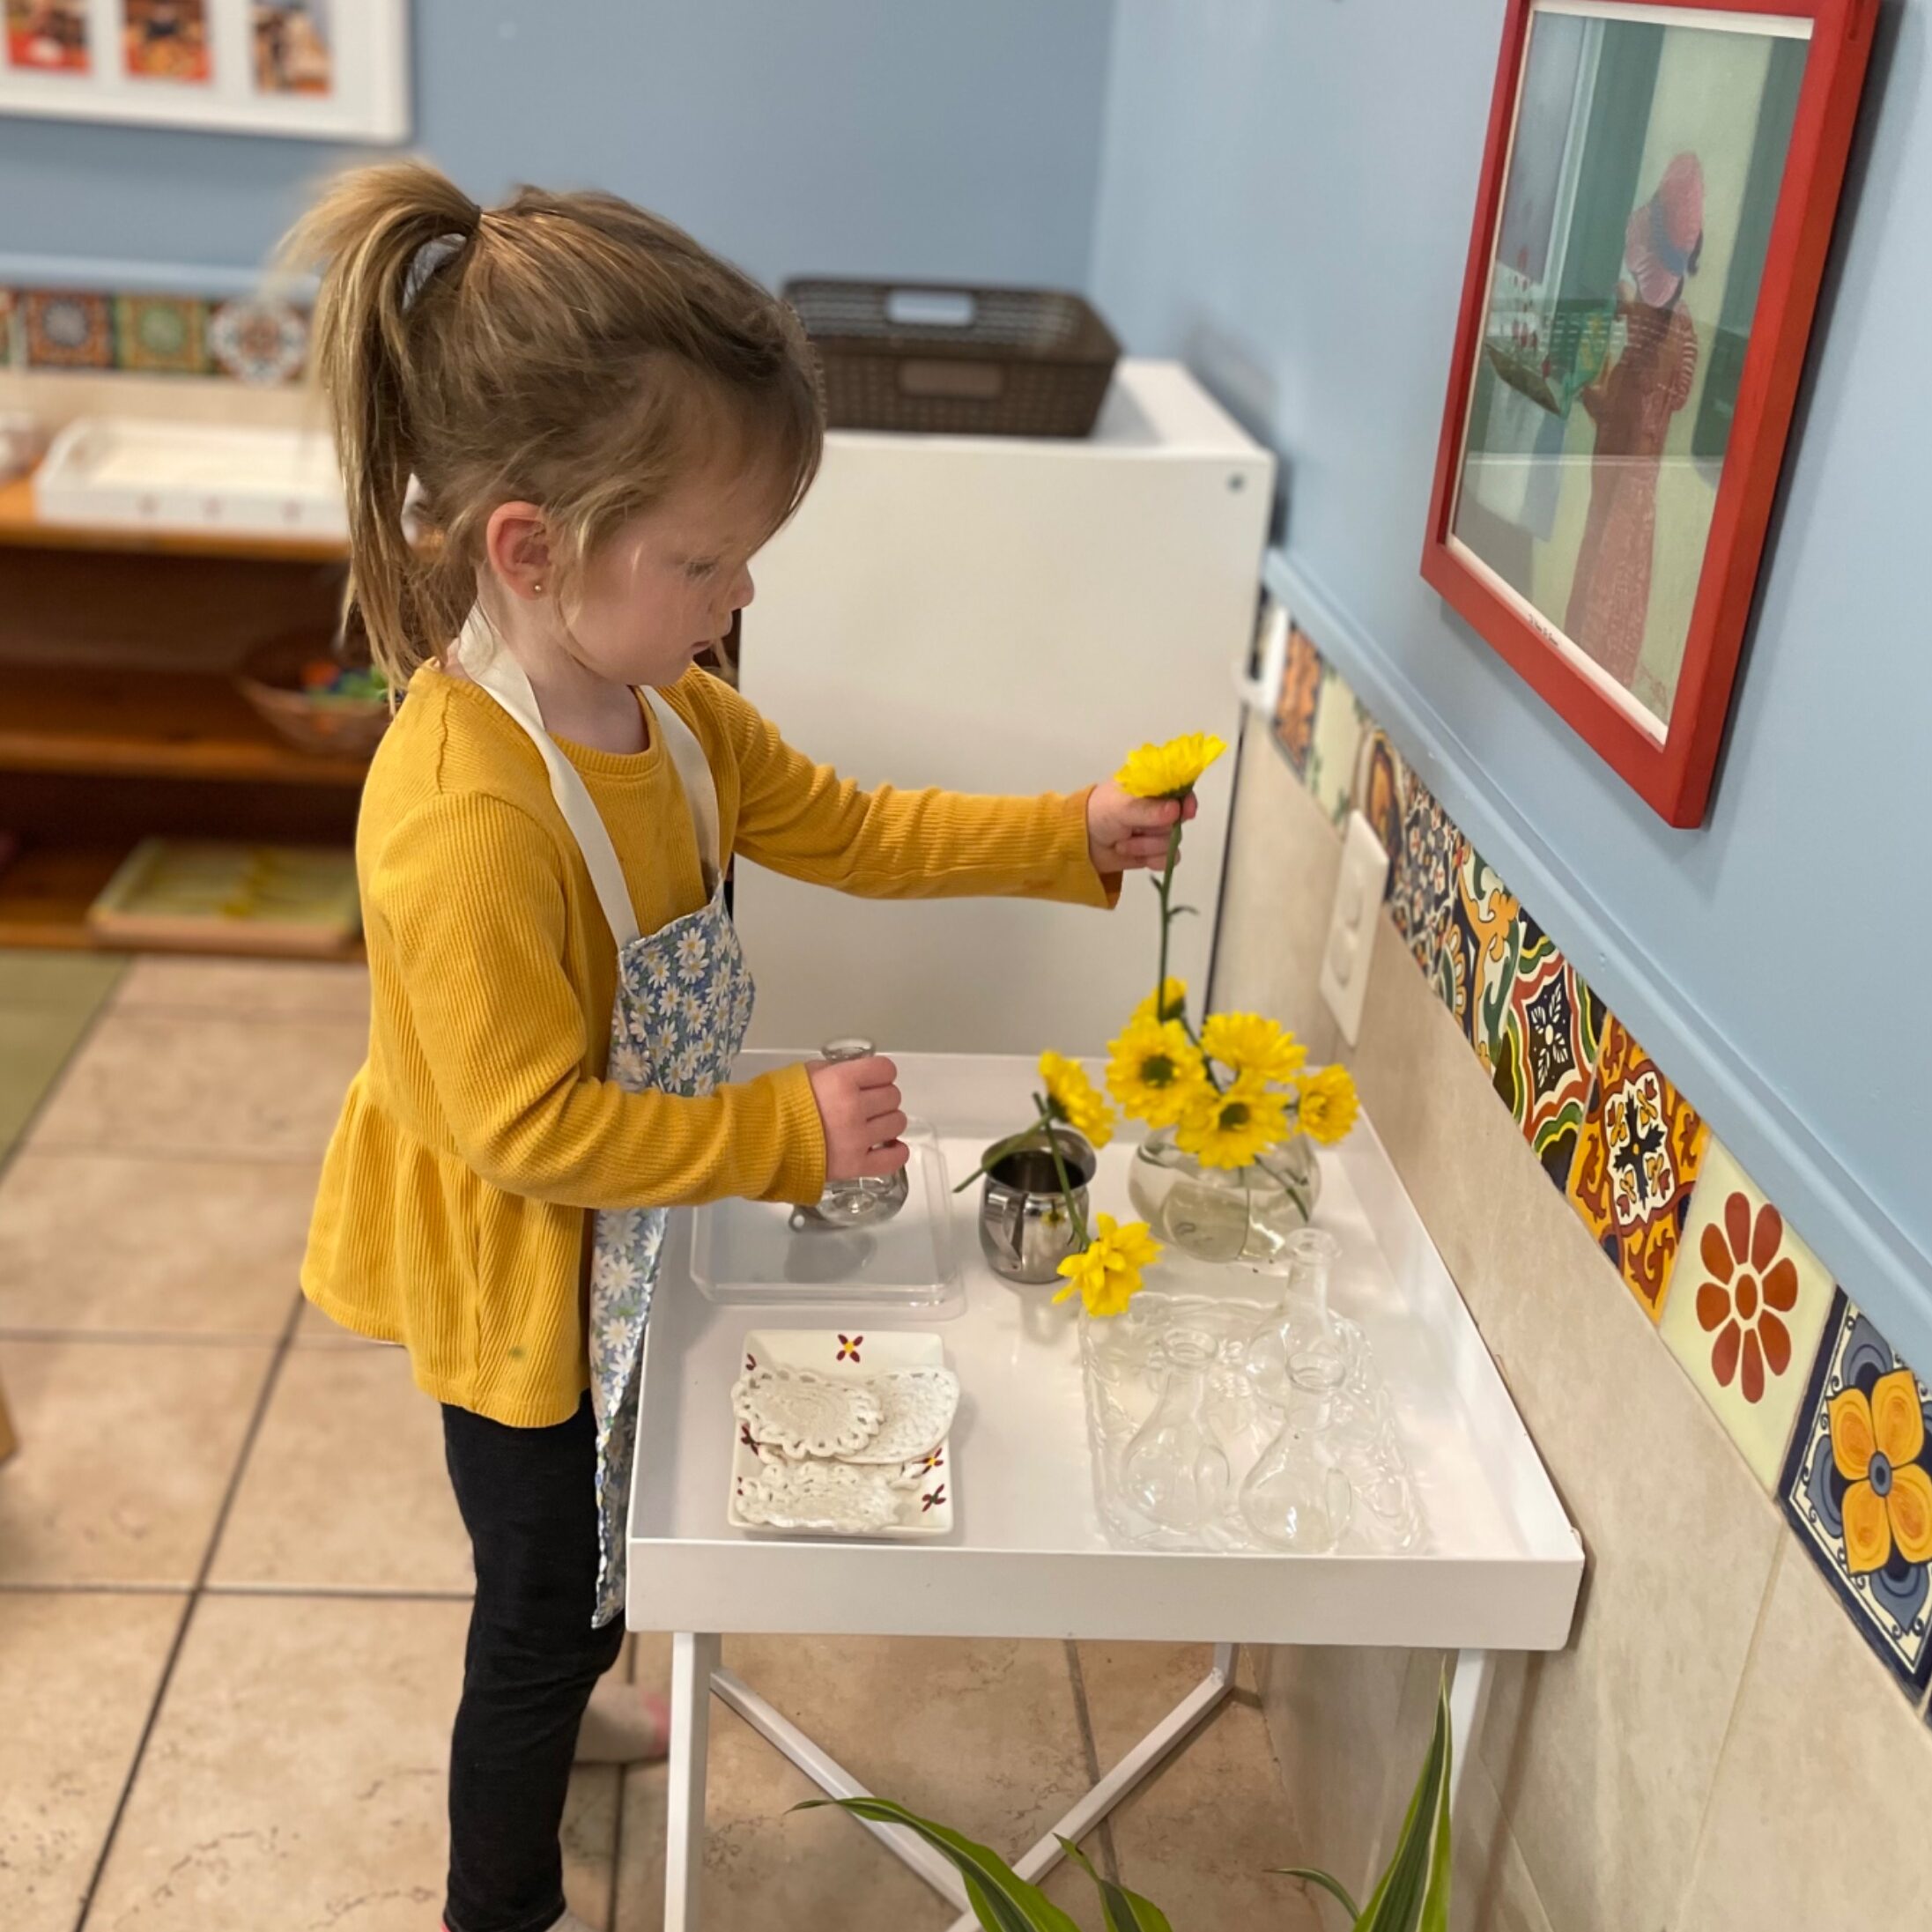 A little girl in an apron is washing sunflowers.